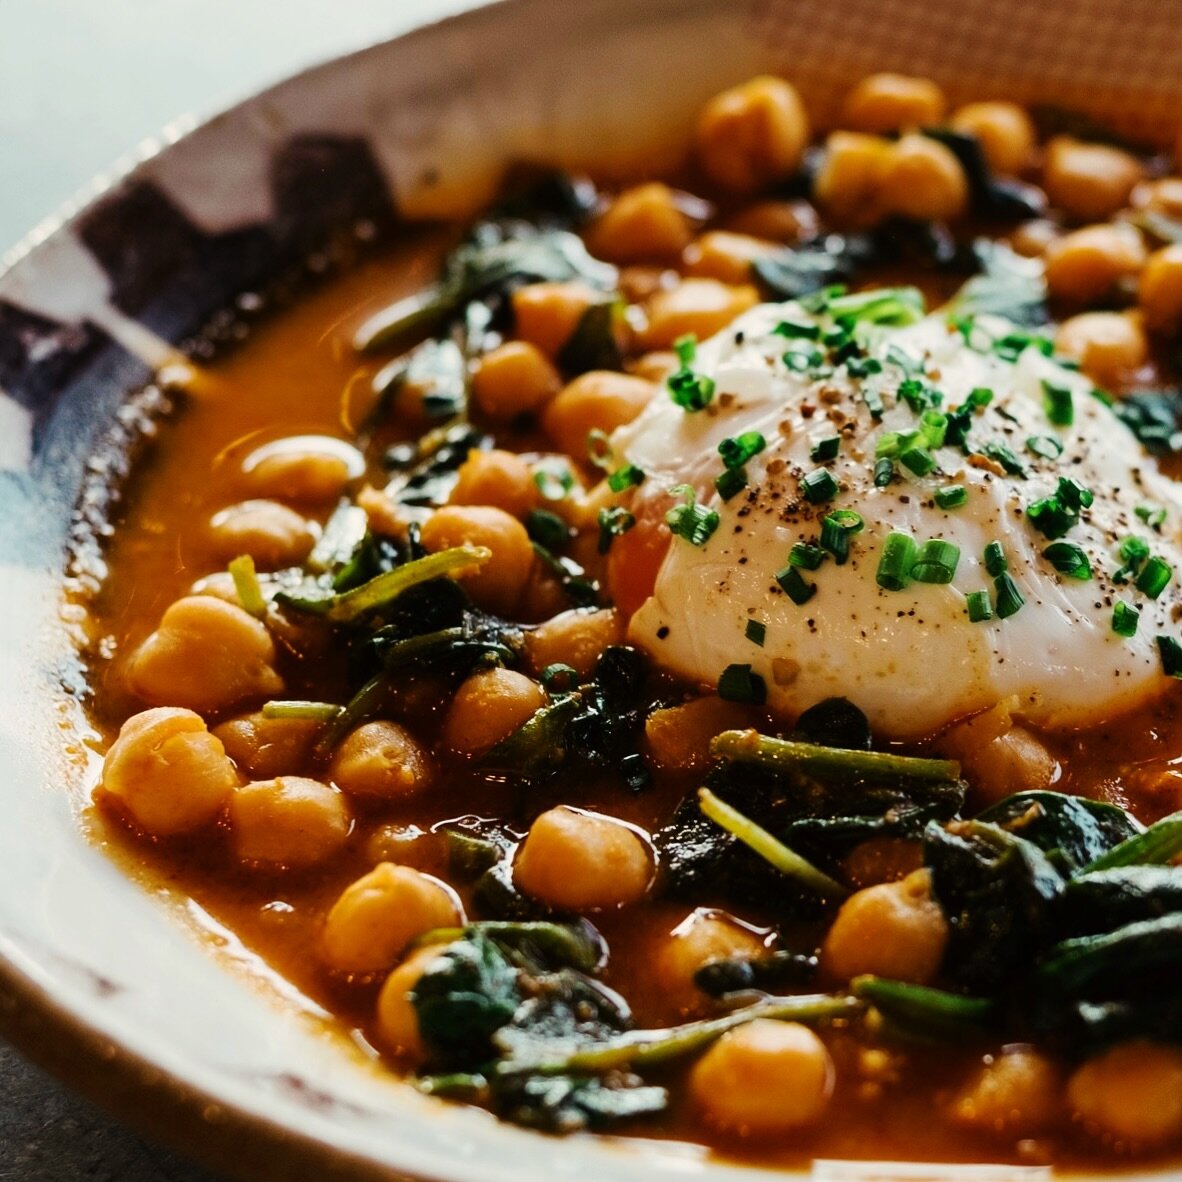 Weekend craving😋 Garbanzos with poached eggs, spinach &amp; piment&oacute;n . All you need for breakfast / brunch / lunch. With a mimosa&hellip; and a cup of coffee&hellip;And a side of jam&oacute;n a la plancha 🇪🇸

#putaneggonit
#ihaveneeds
#brun